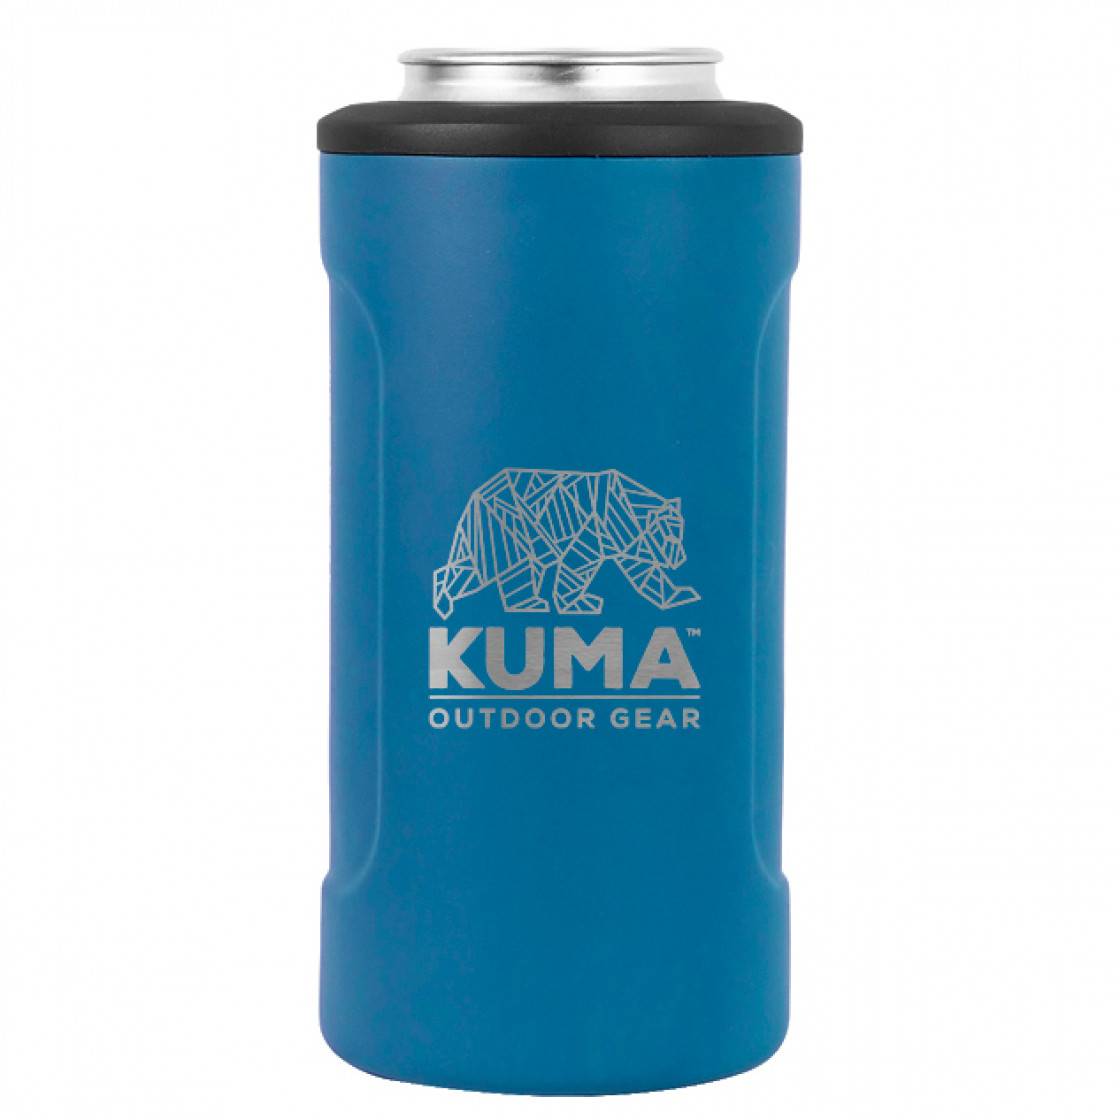 Kuma Outdoor Gear Qualifies for Free Shipping Kuma Outdoor Gear 3-In-1 Coozie Blue #KM-31CZ-BL